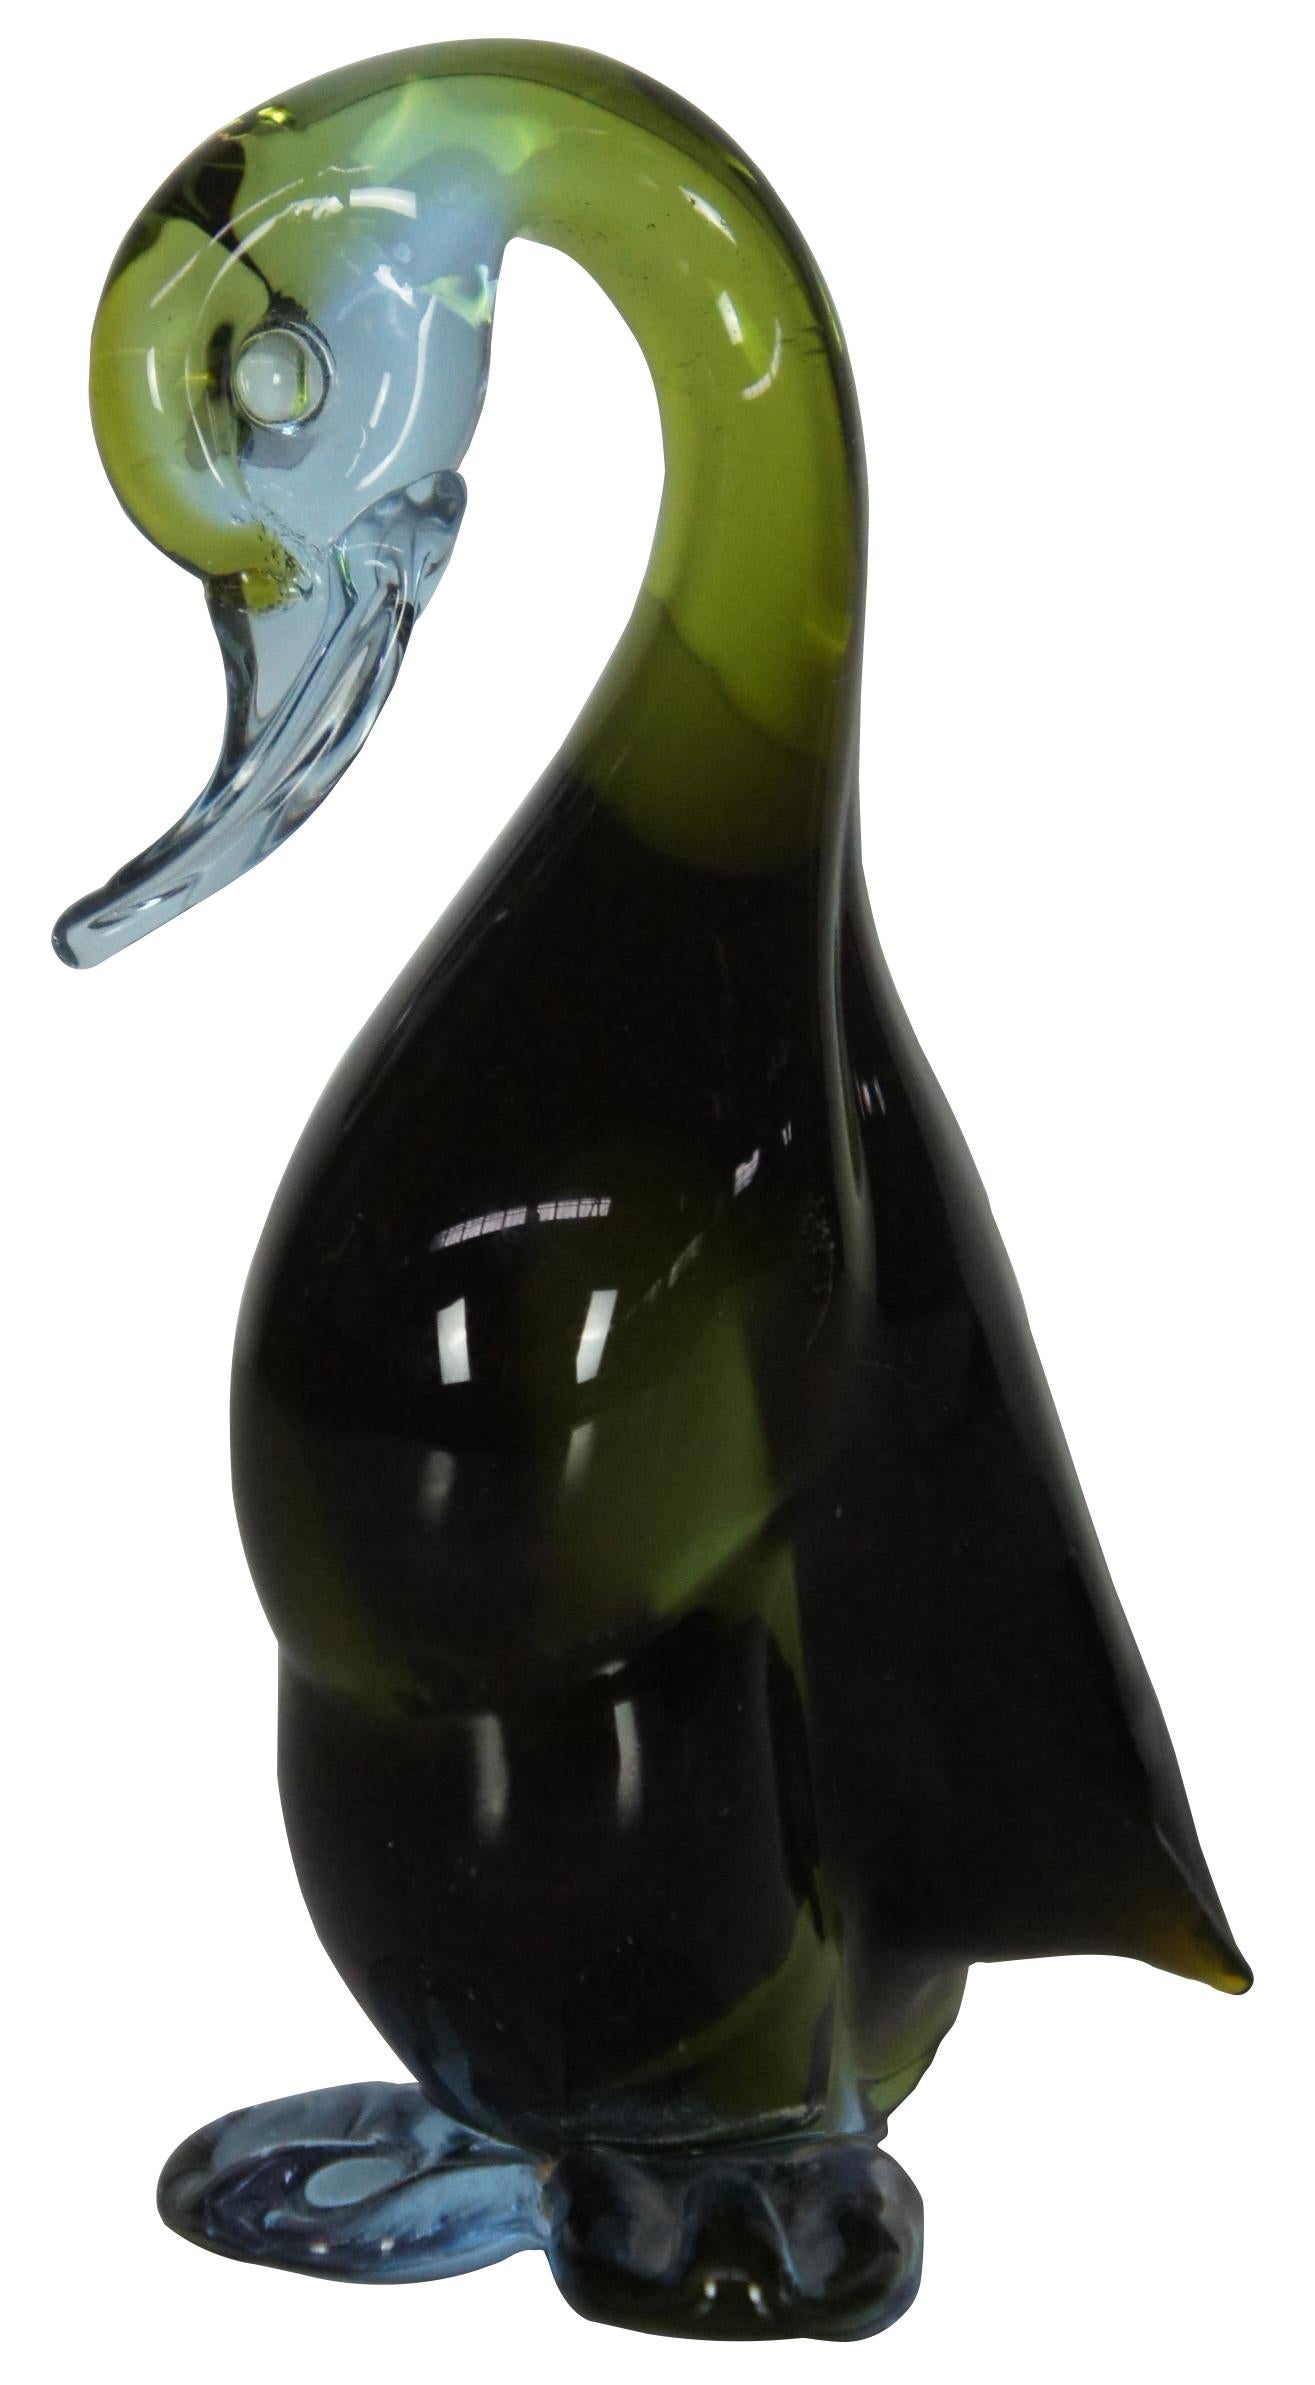 Hand blown Murano Sommerso Italian art glass figurine in the shape of a translucent olive green and sky blue duck / swan / goose / bird. Measure: 5